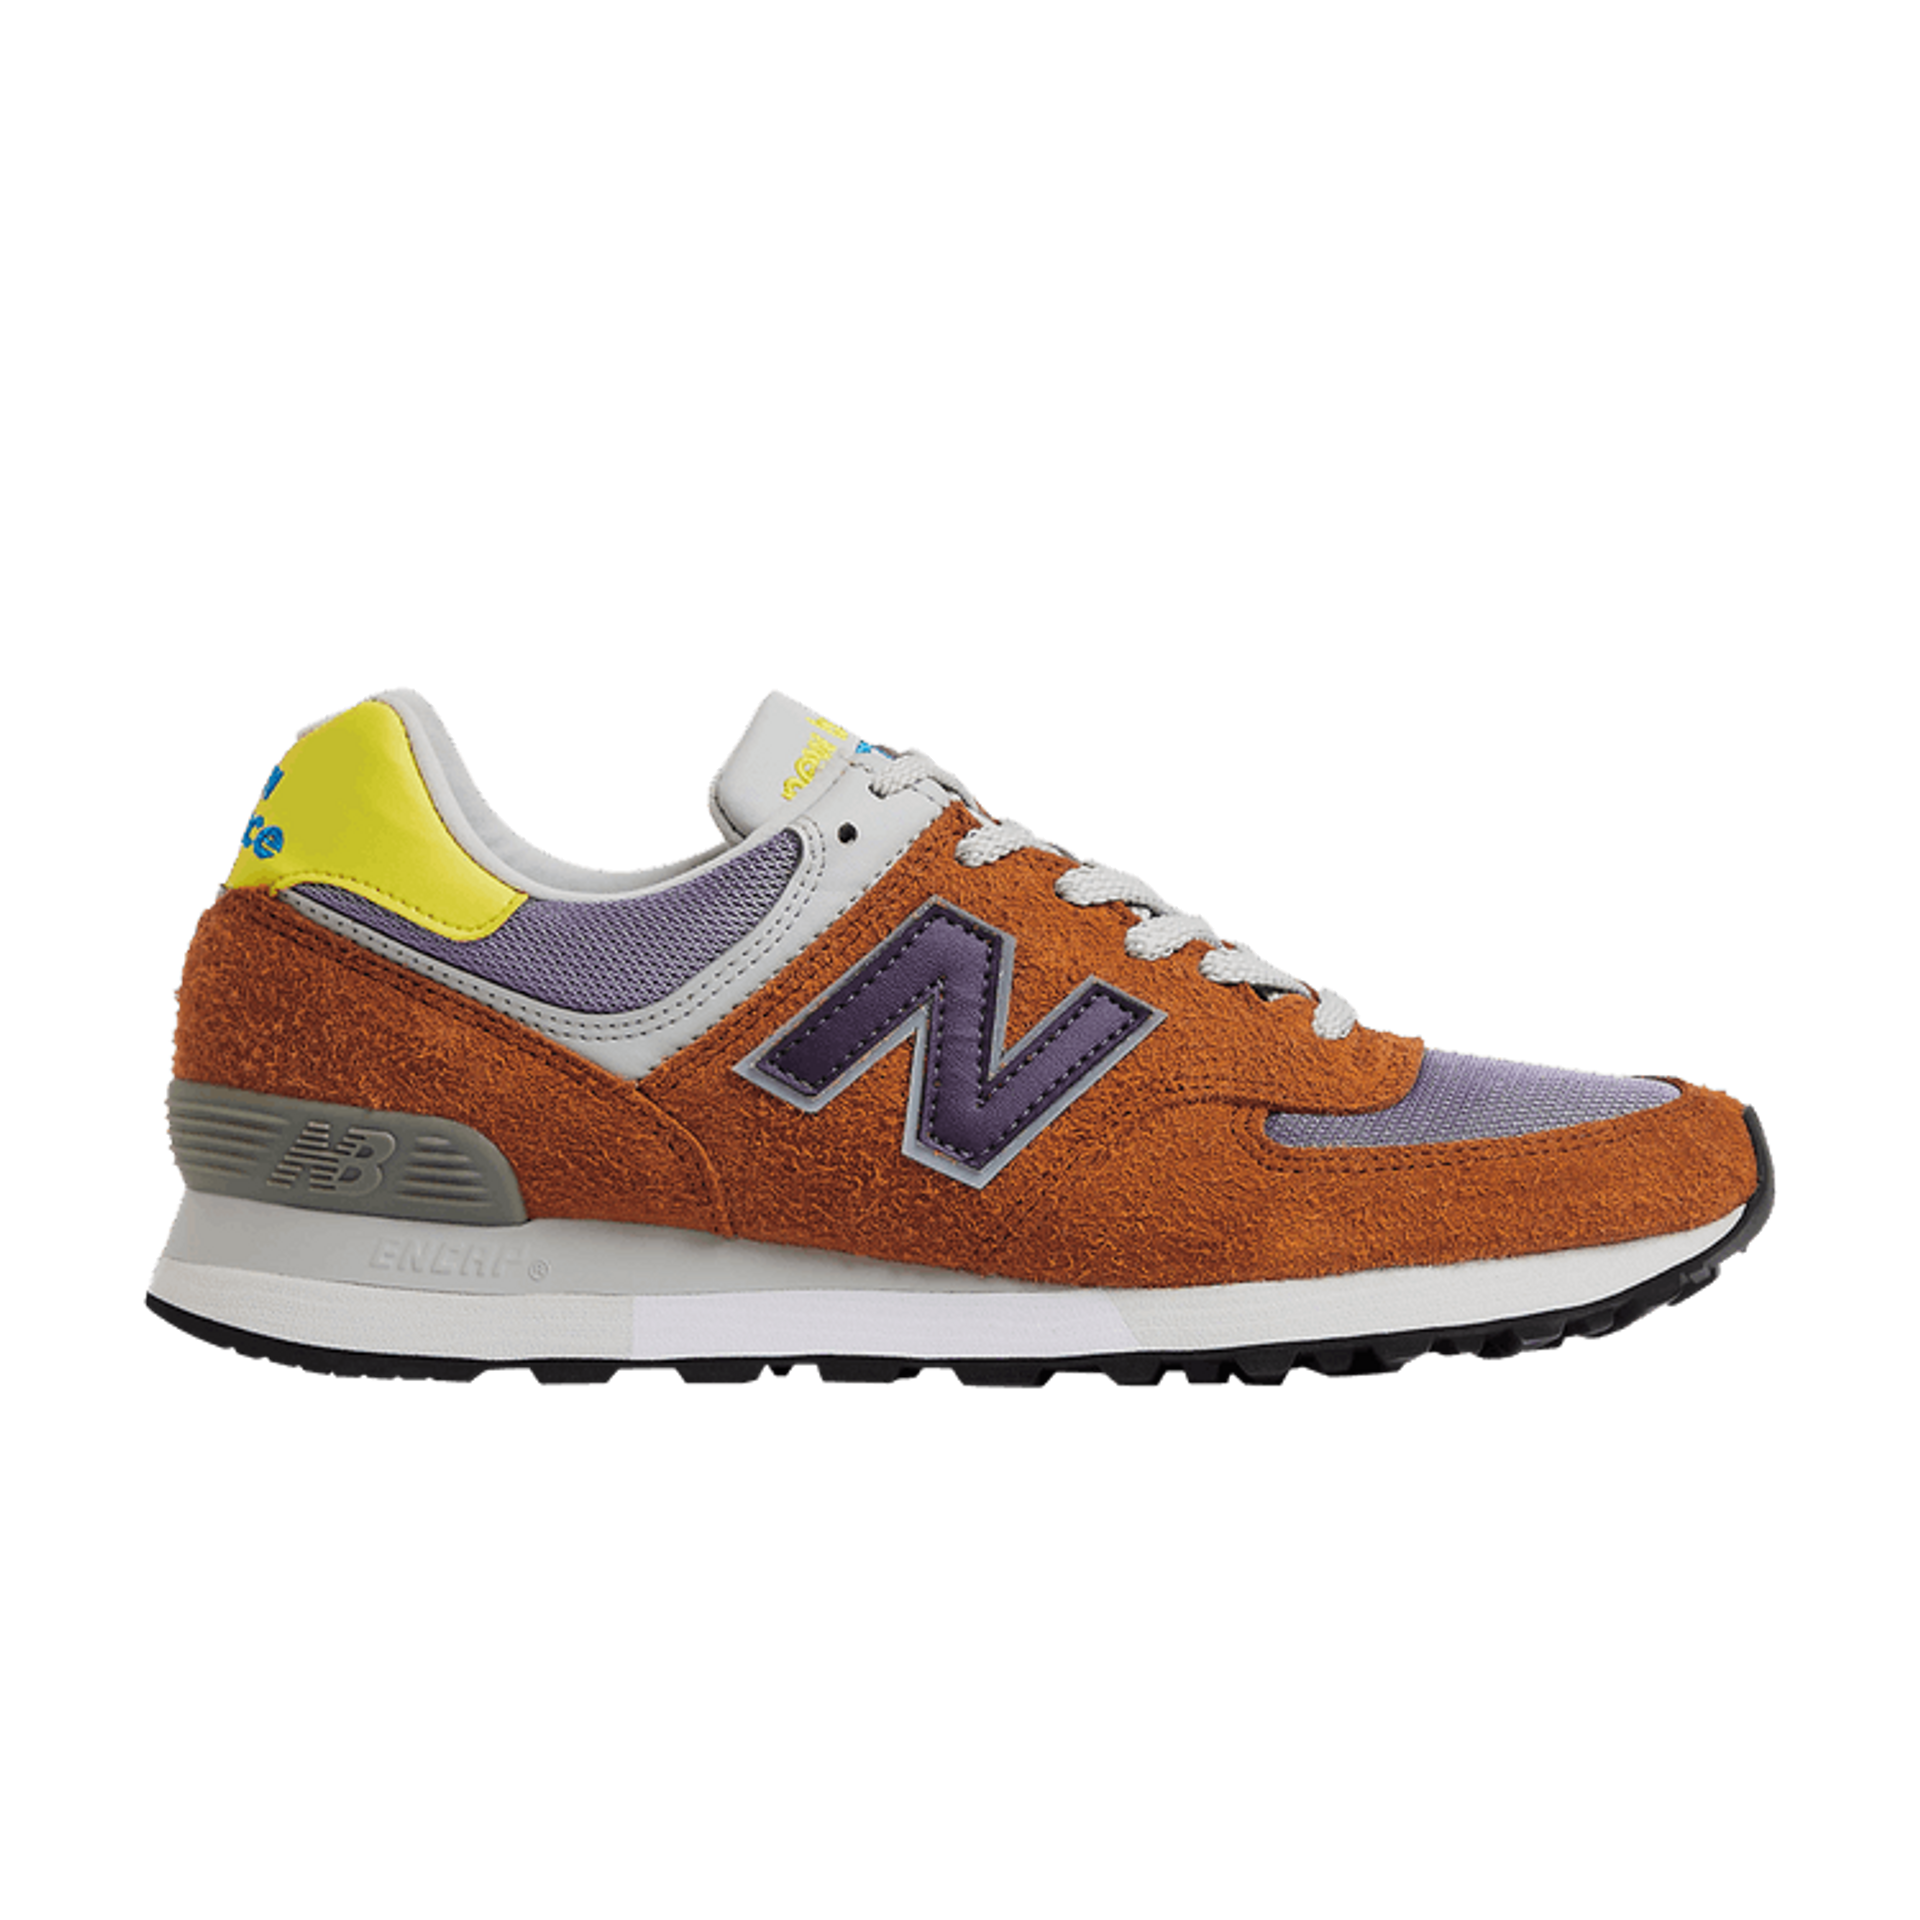 New Balance 576 Made in England 'Apricot'